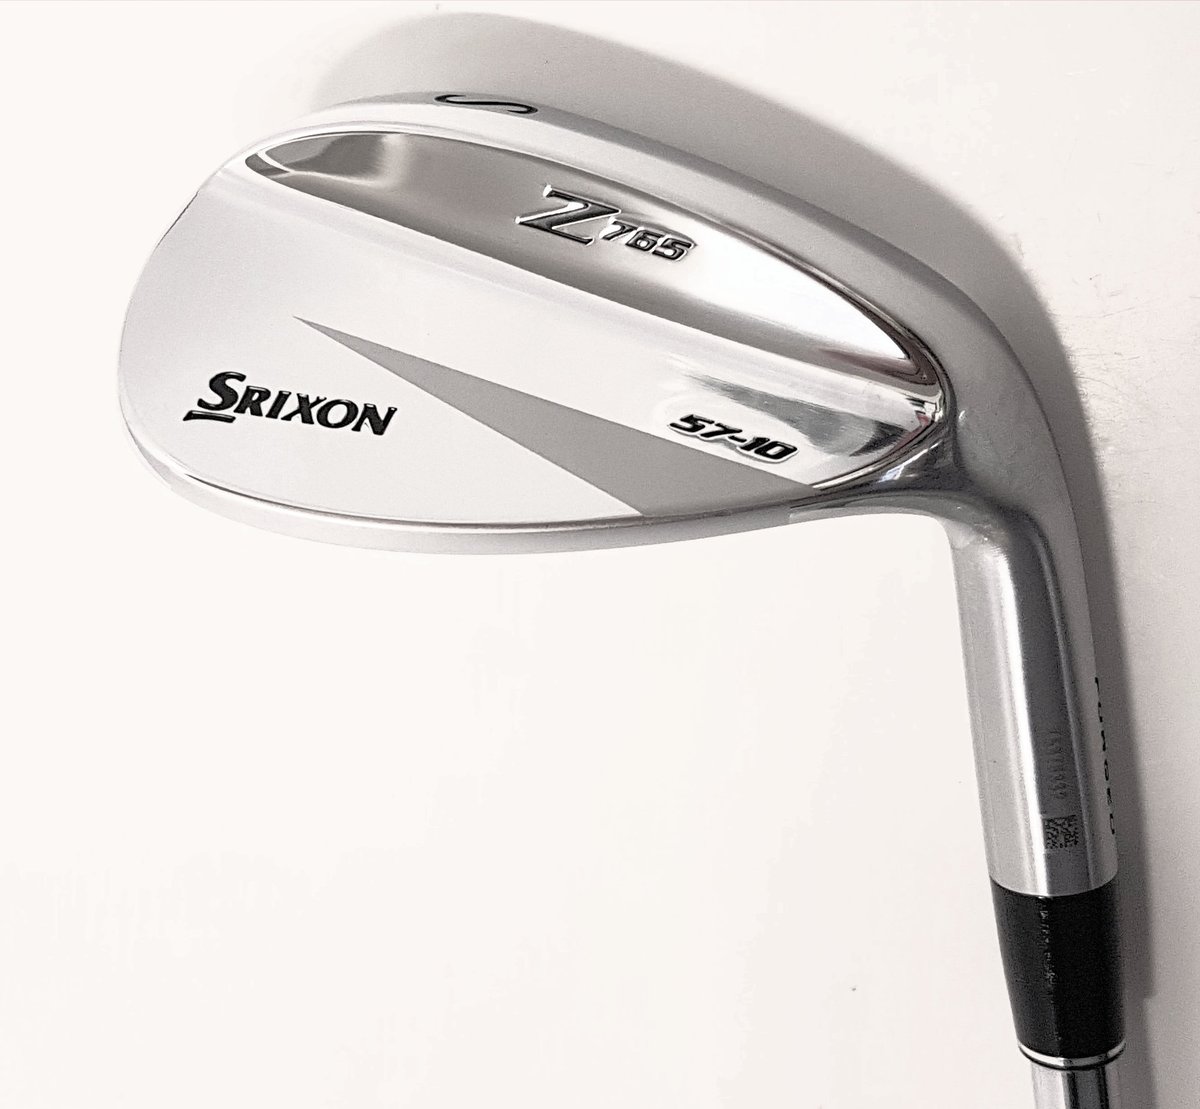 forged wedge. We have Z 765 and Z 565 